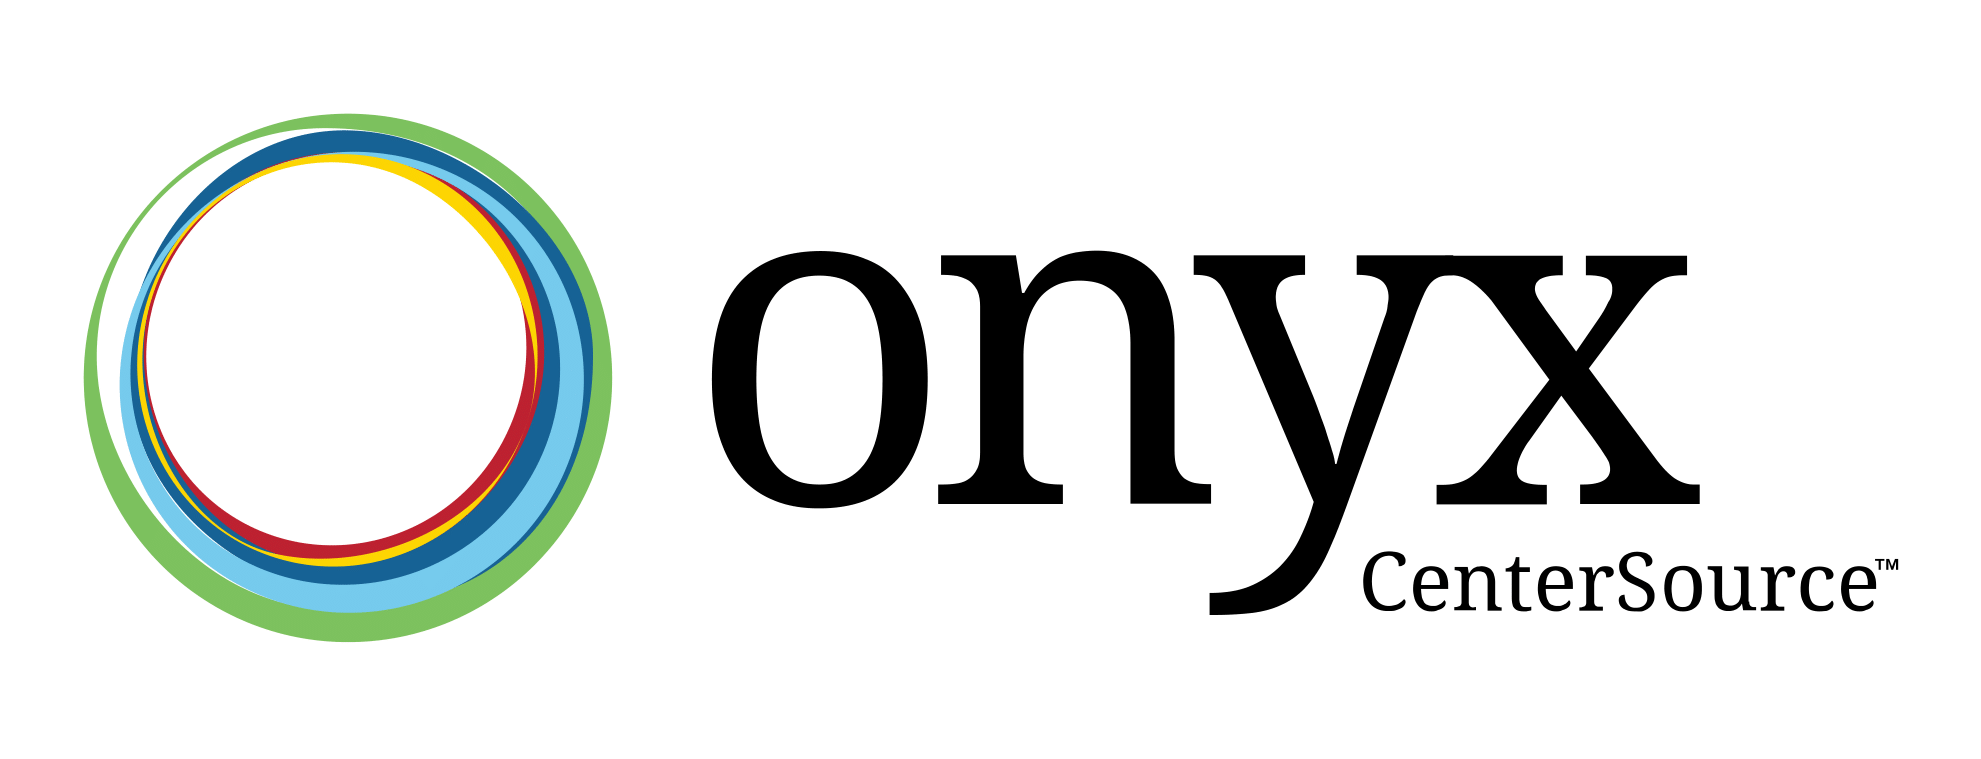 Onyx CenterSource